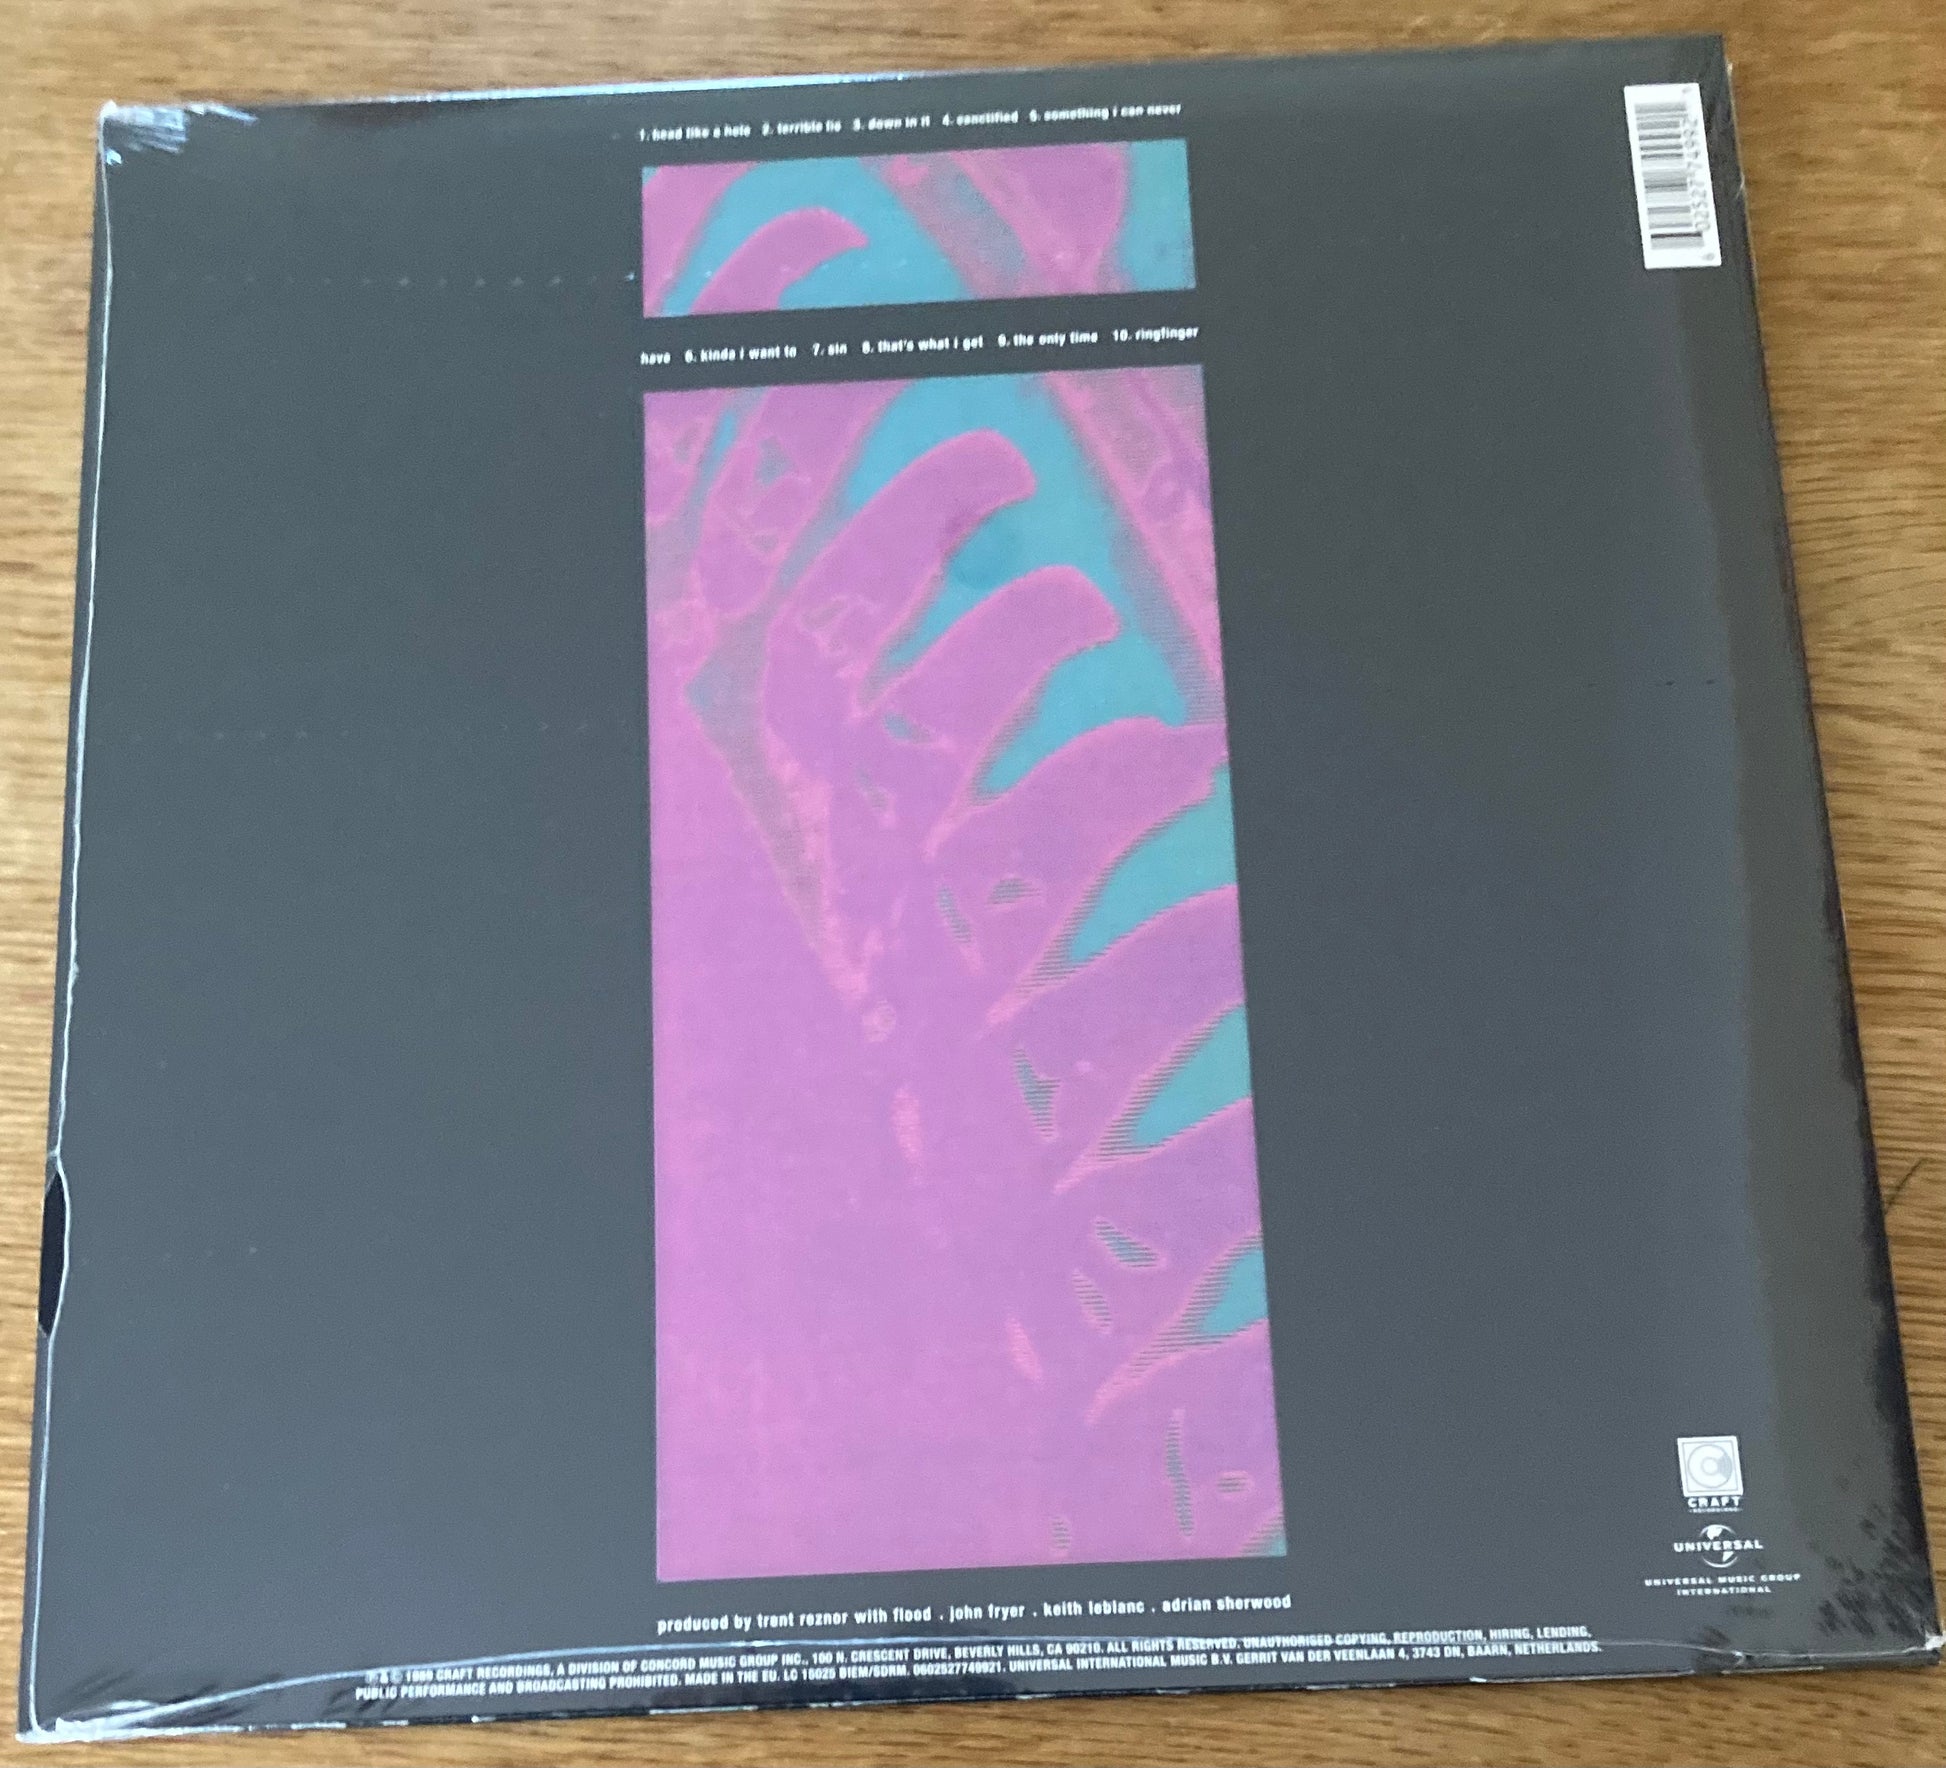 The back of 'Nine Inch Nails - Pretty Hate Machine' on vinyl